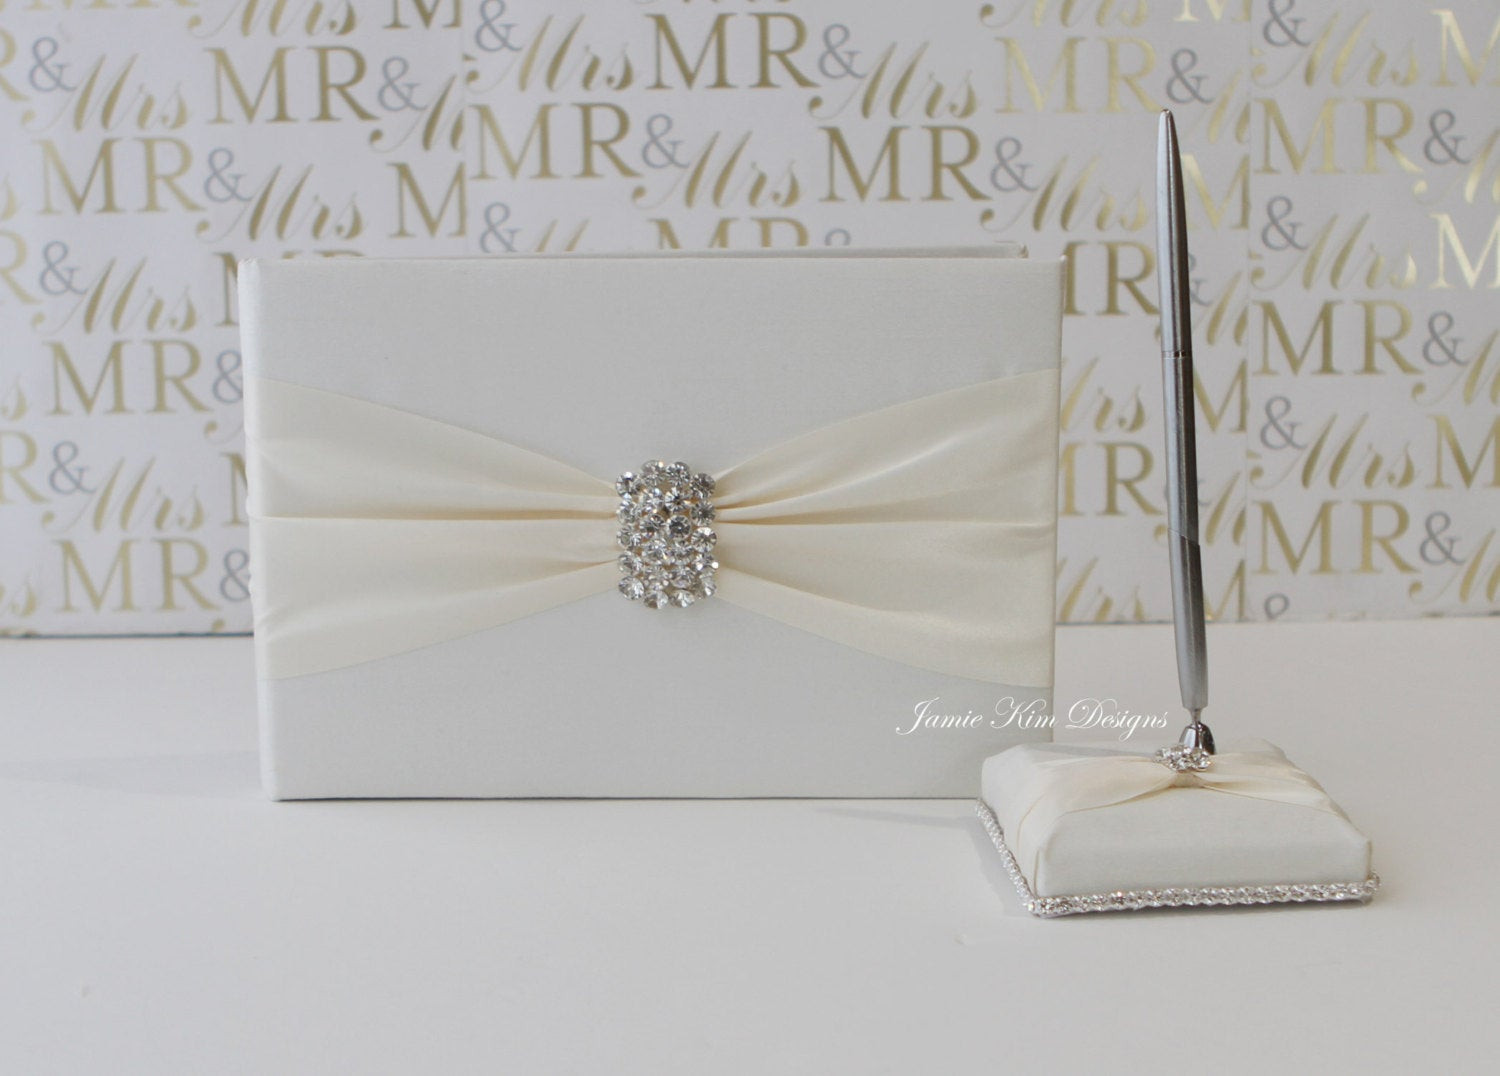 Wedding Guest Book And Pen
 Wedding Guest Book Sign In book and pen set Custom Made to